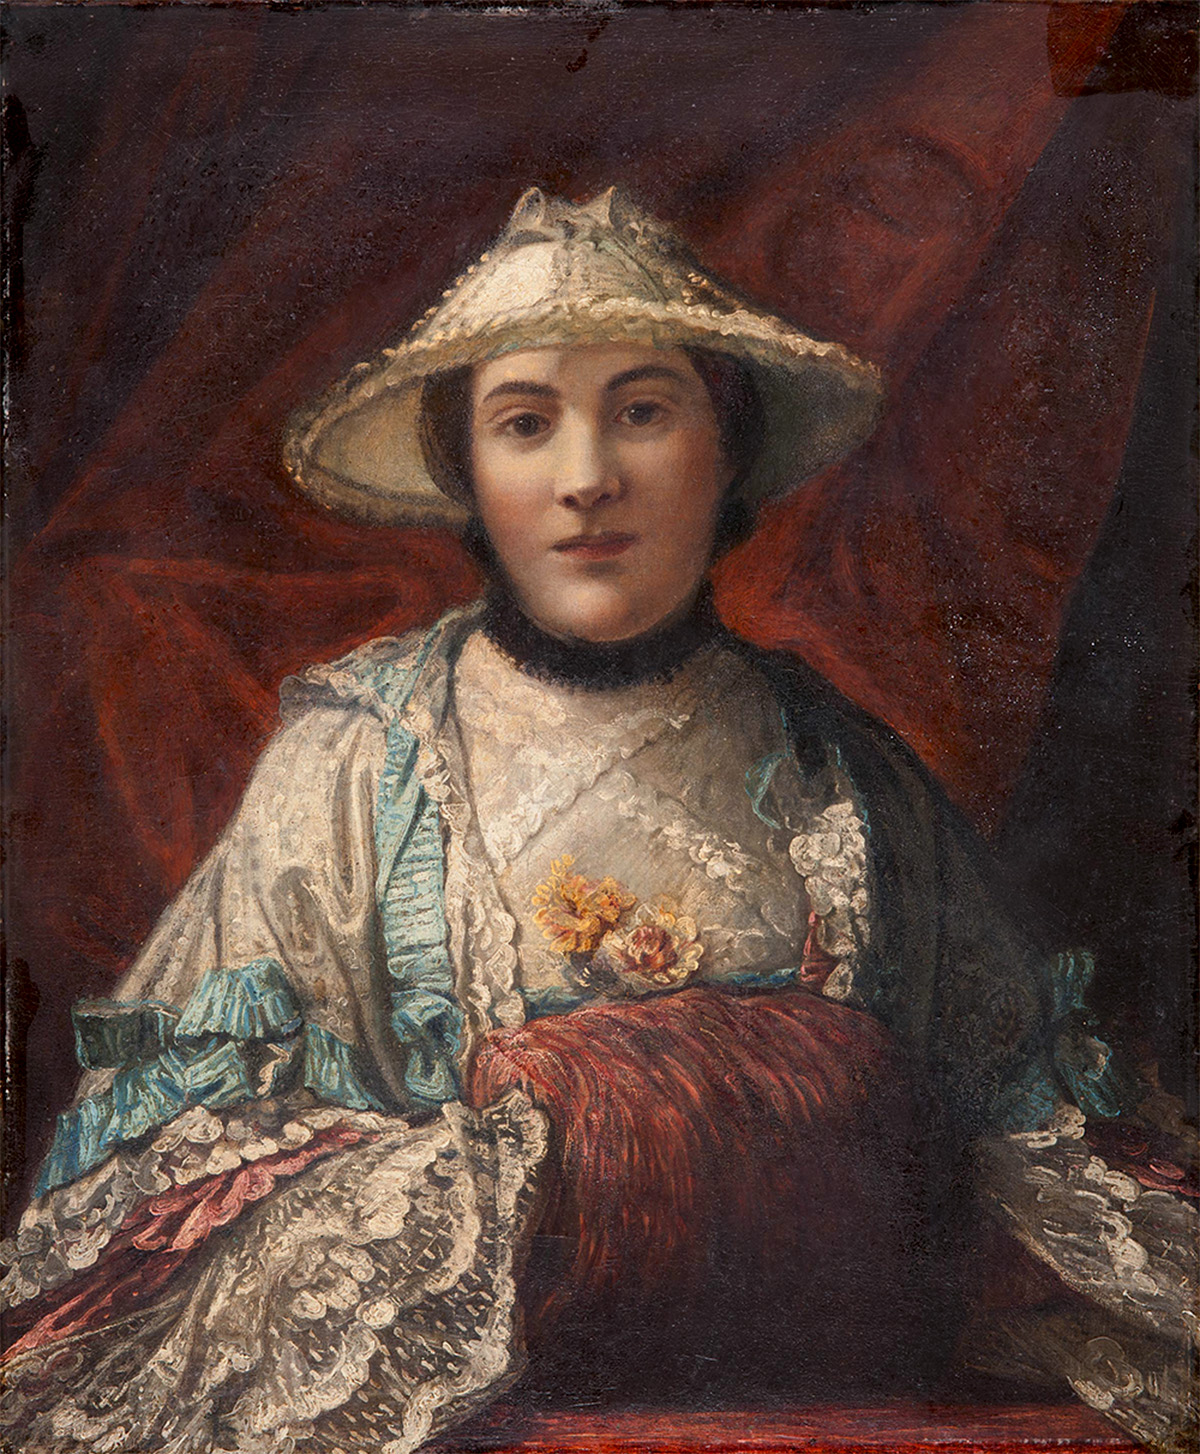 Portrait of a woman with silk and lace trimmed sleeves wearing a bonnet and sitting against a draped background.